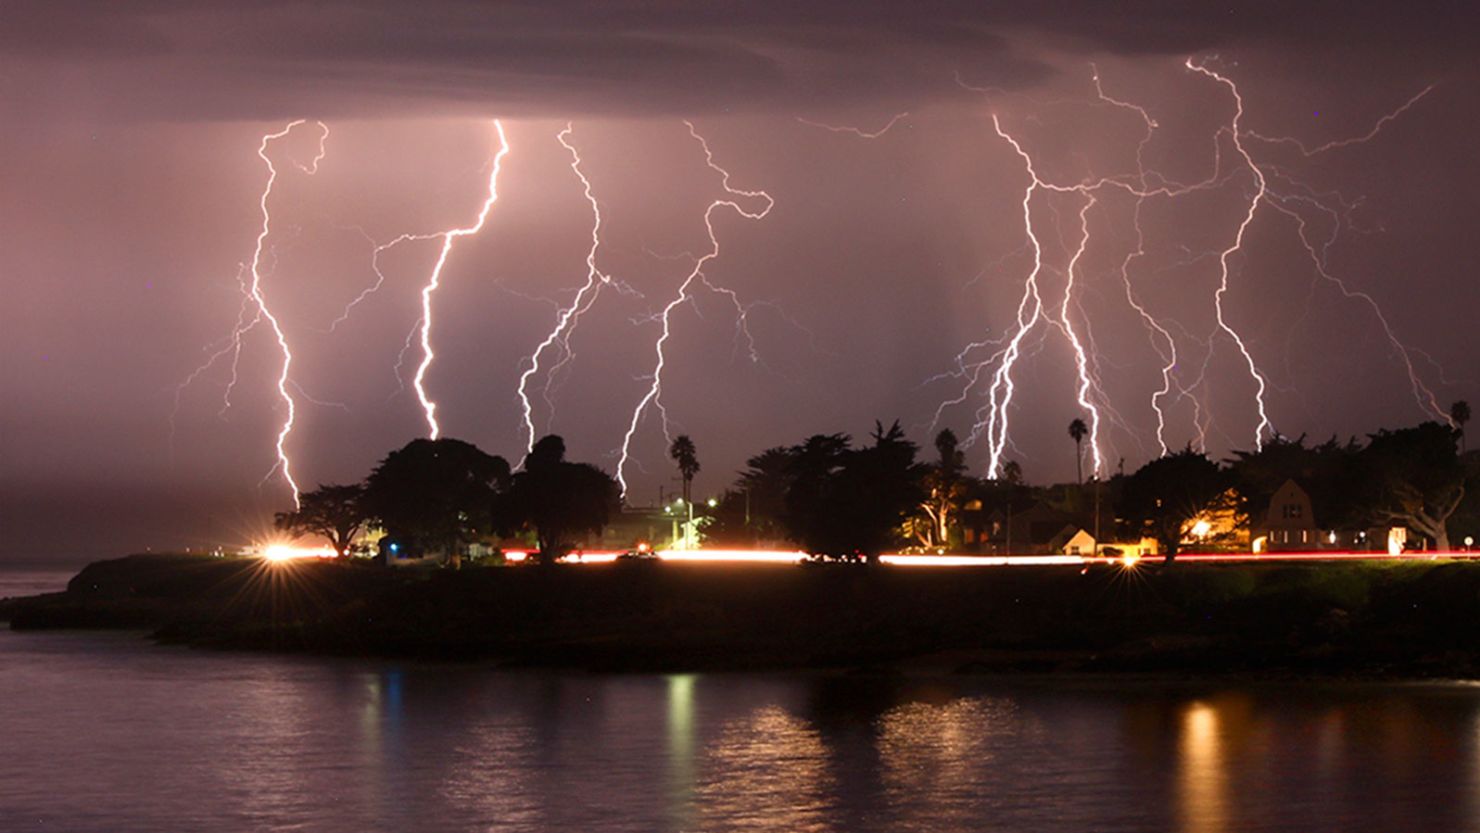 The lightning storm seen here, crackling over Mitchell's Cover in Santa Cruz, California, was one of many that rolled through the state in August 2020, sparking dozens of wildfires.